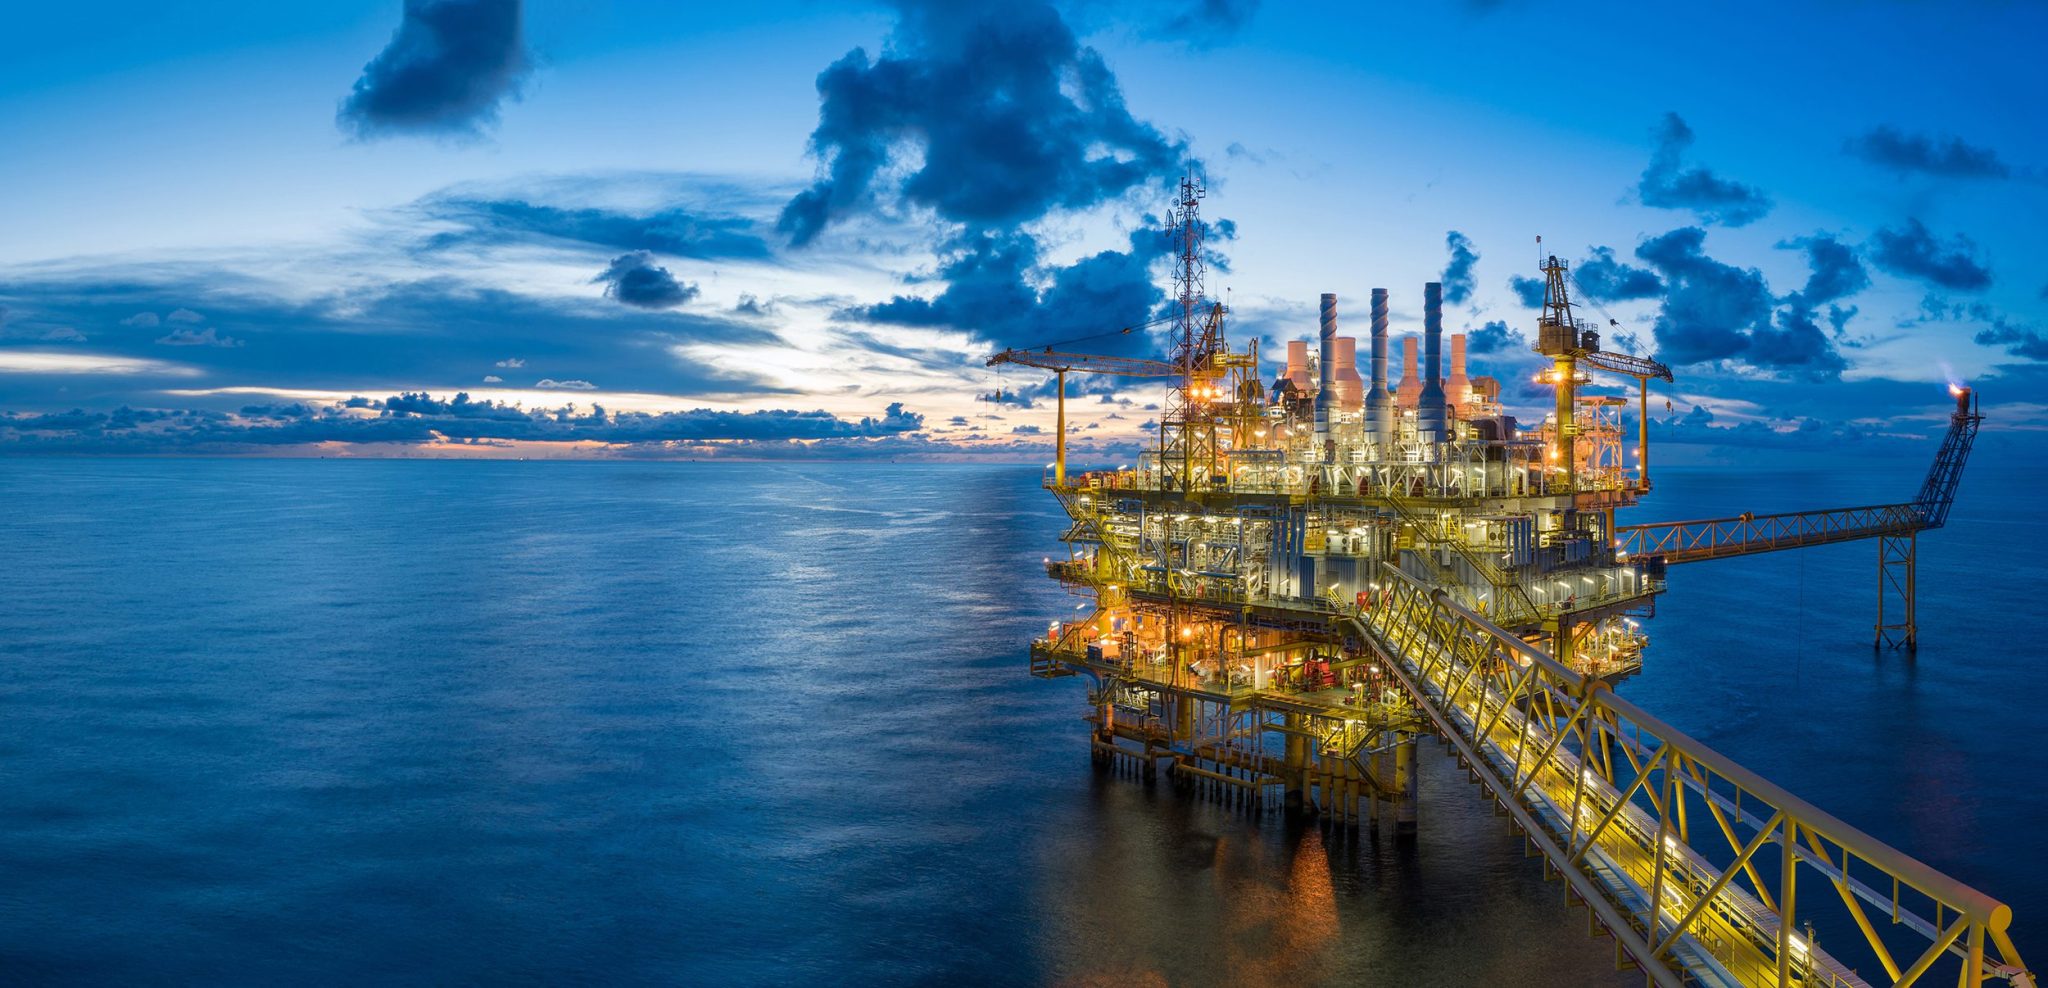 Panorama of Oil and Gas central processing platform in twilight